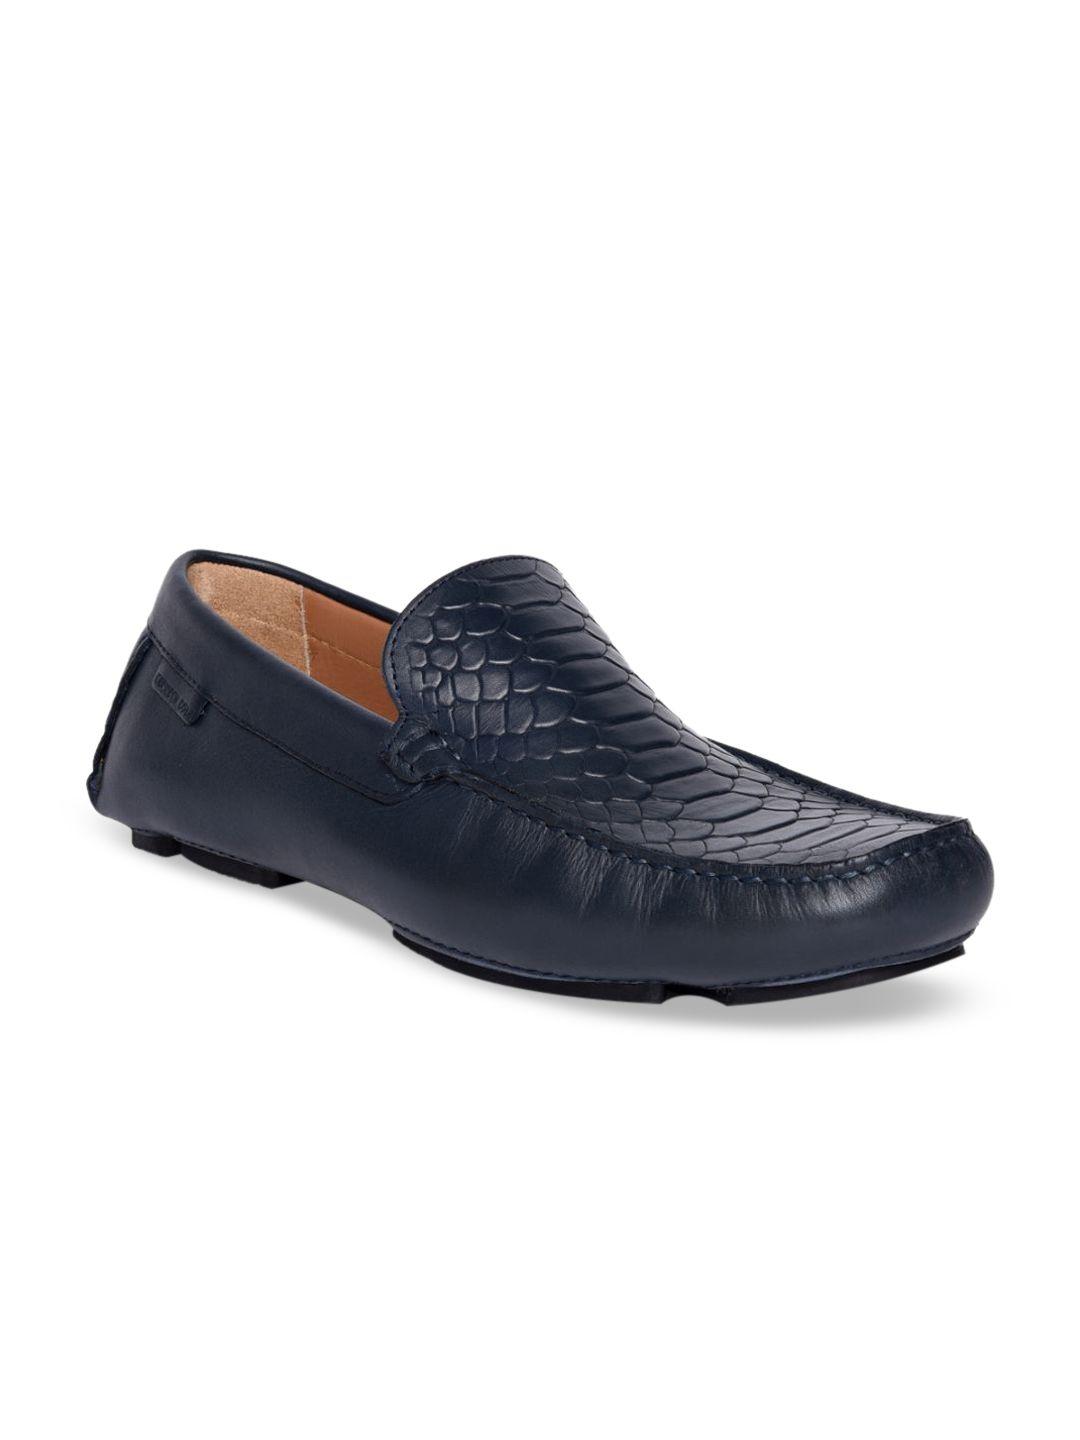 kenneth-cole-men-navy-blue-textured-leather-loafers